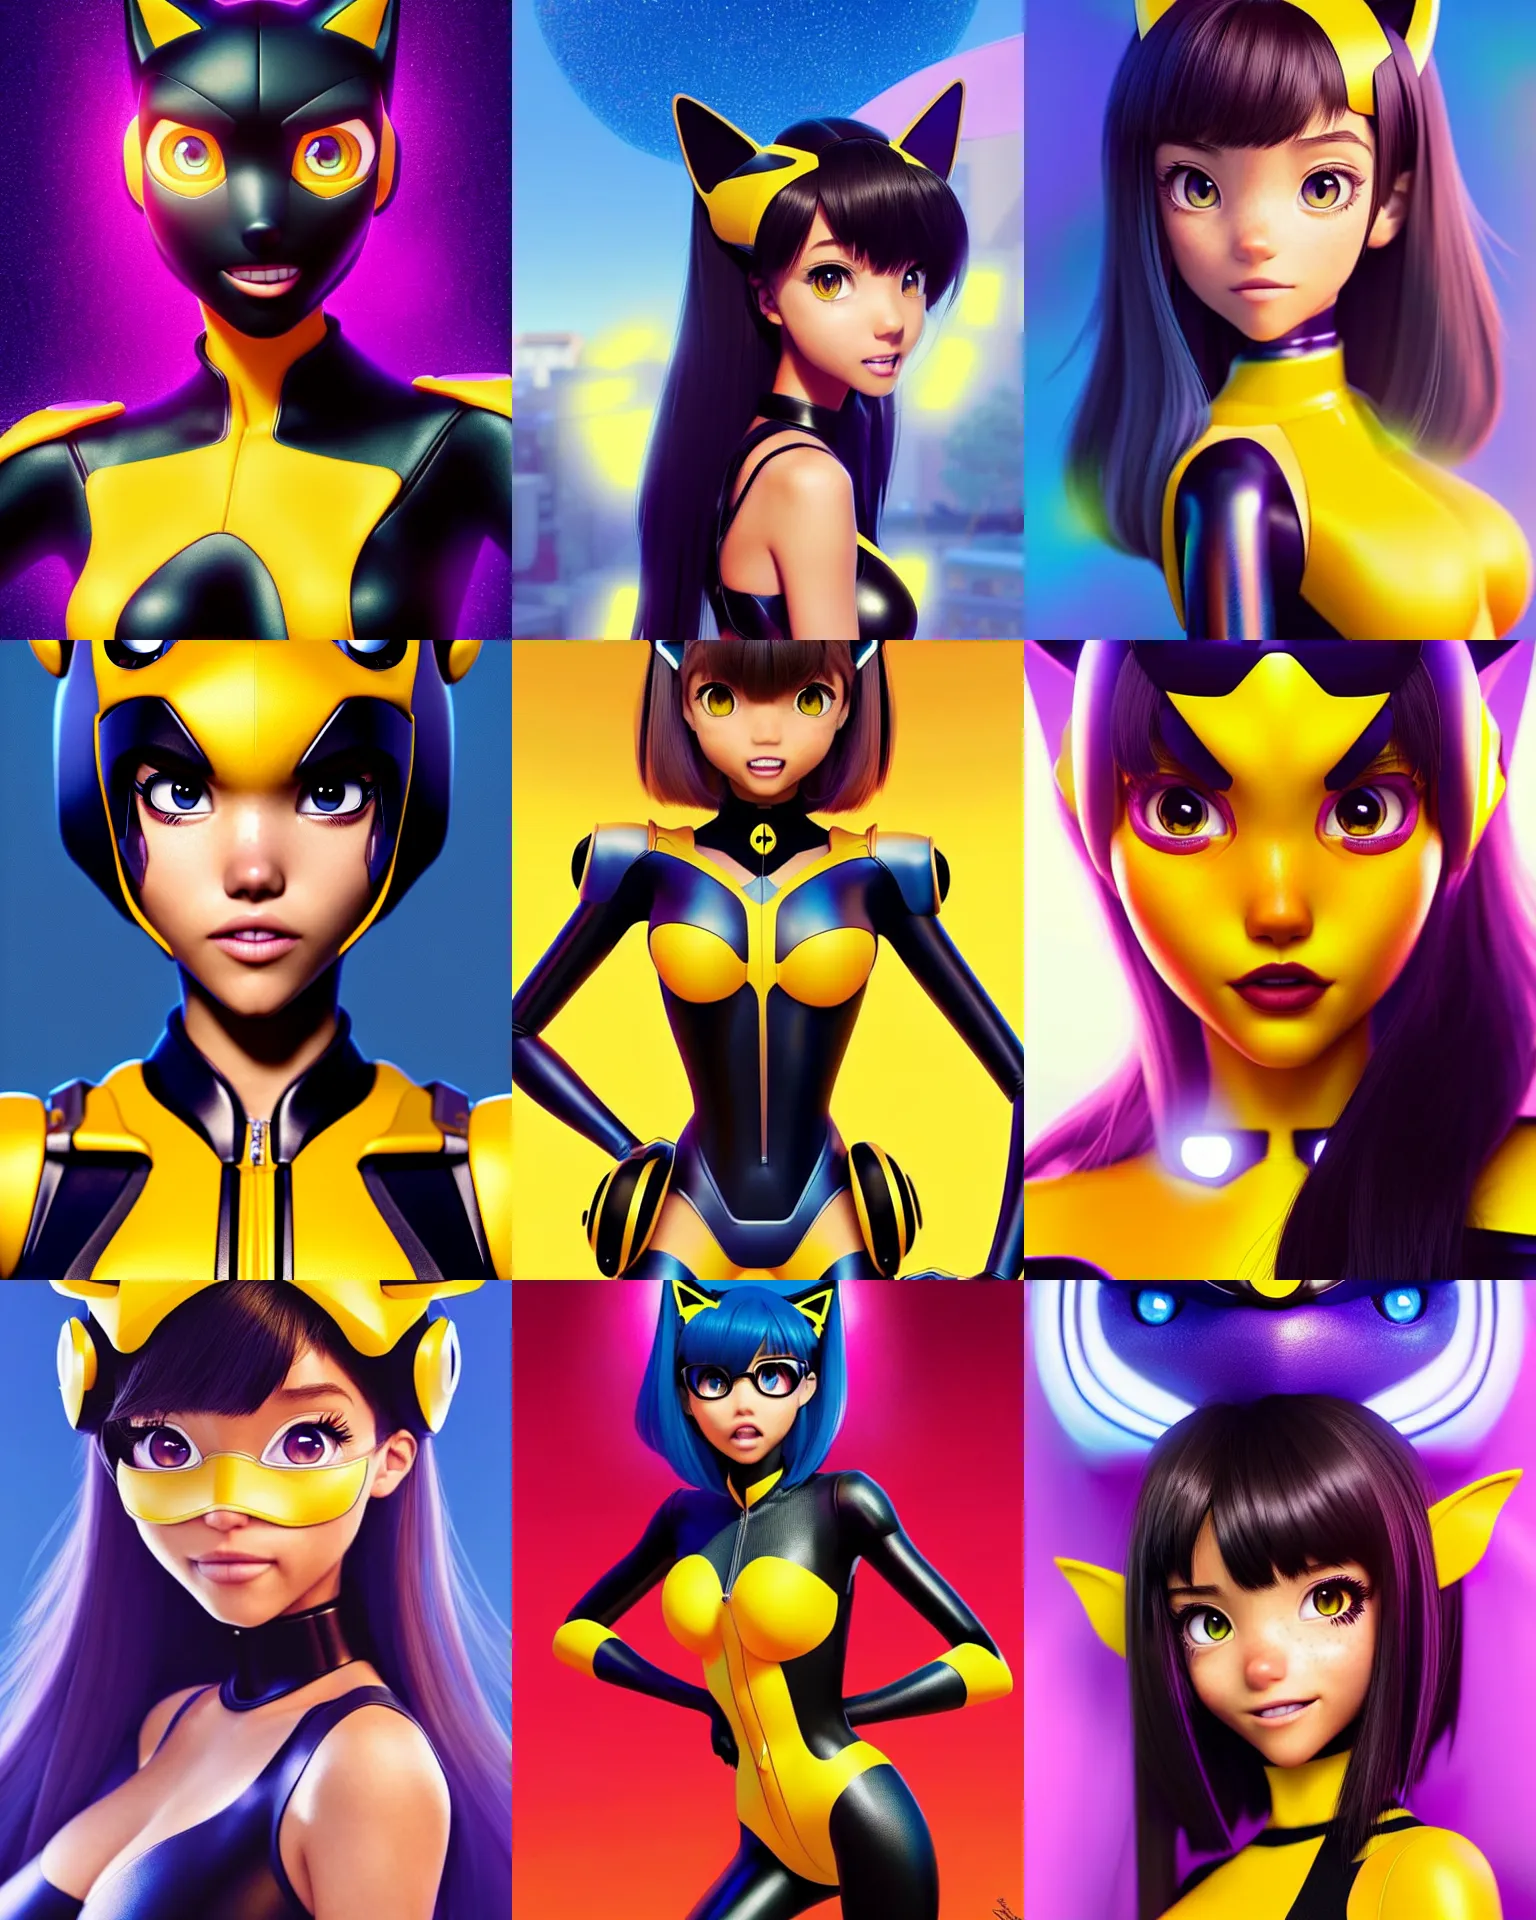 Prompt: pixar anime movie poster portrait photo : : of ( jessica alba x madison beer ) as catgirl bumblebee cyborg by weta, marvel : : by wlop, ilya kuvshinov, rossdraws, artgerm, artstation, unreal engine : : rave makeup, pearlescent, morning, vogue cover : :